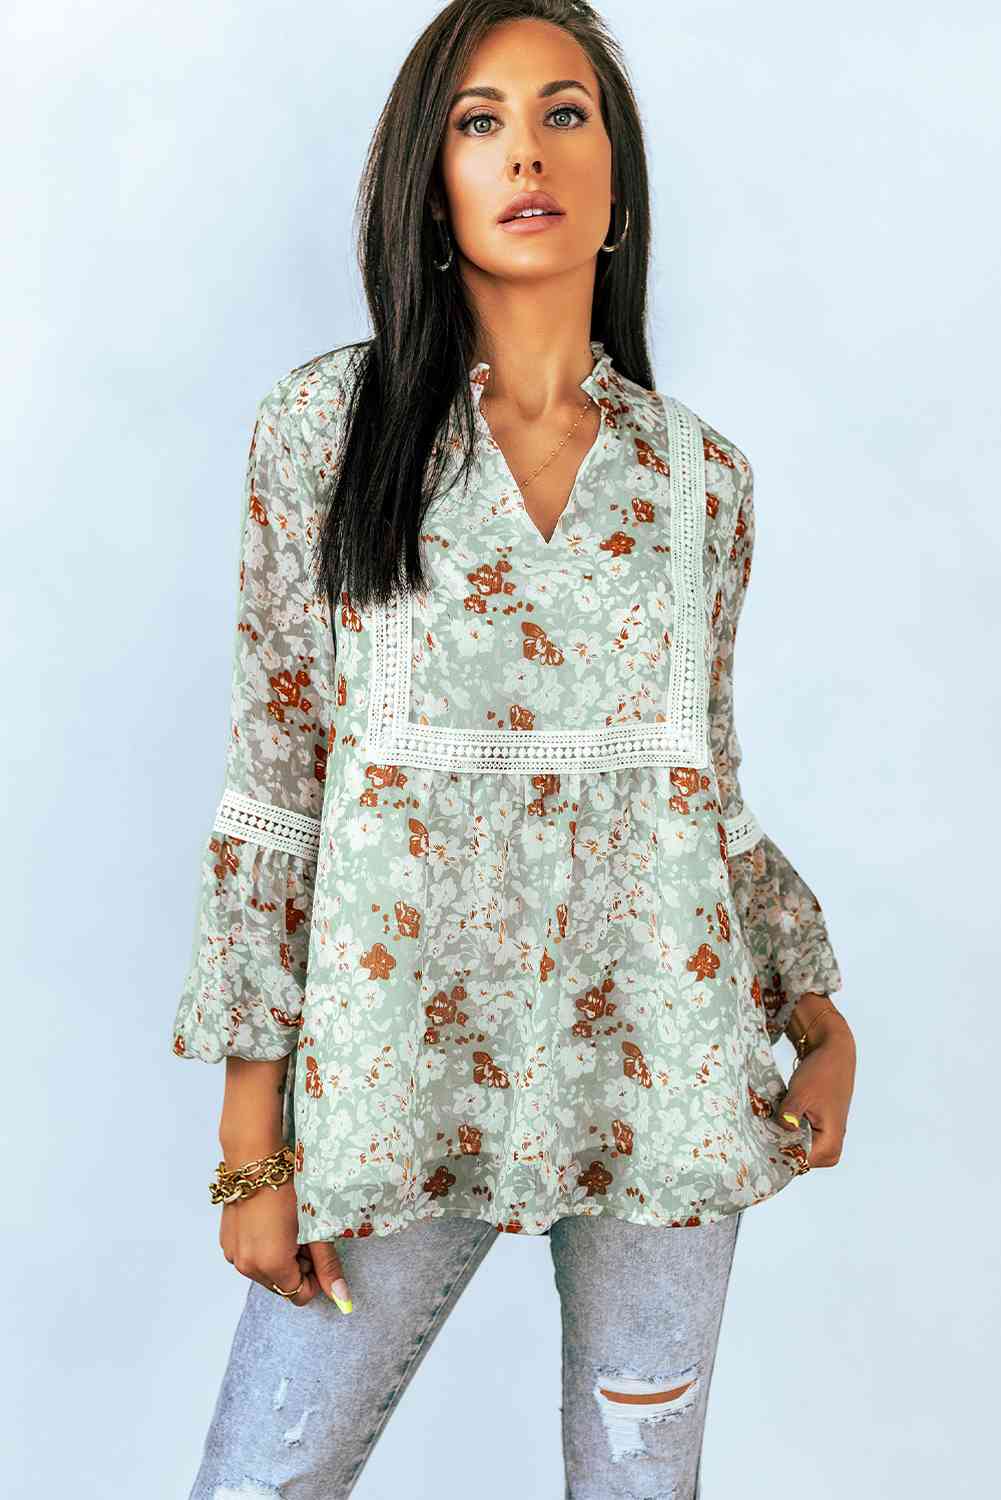 FULL SIZE Sage Green Floral Lace Trim Blouse